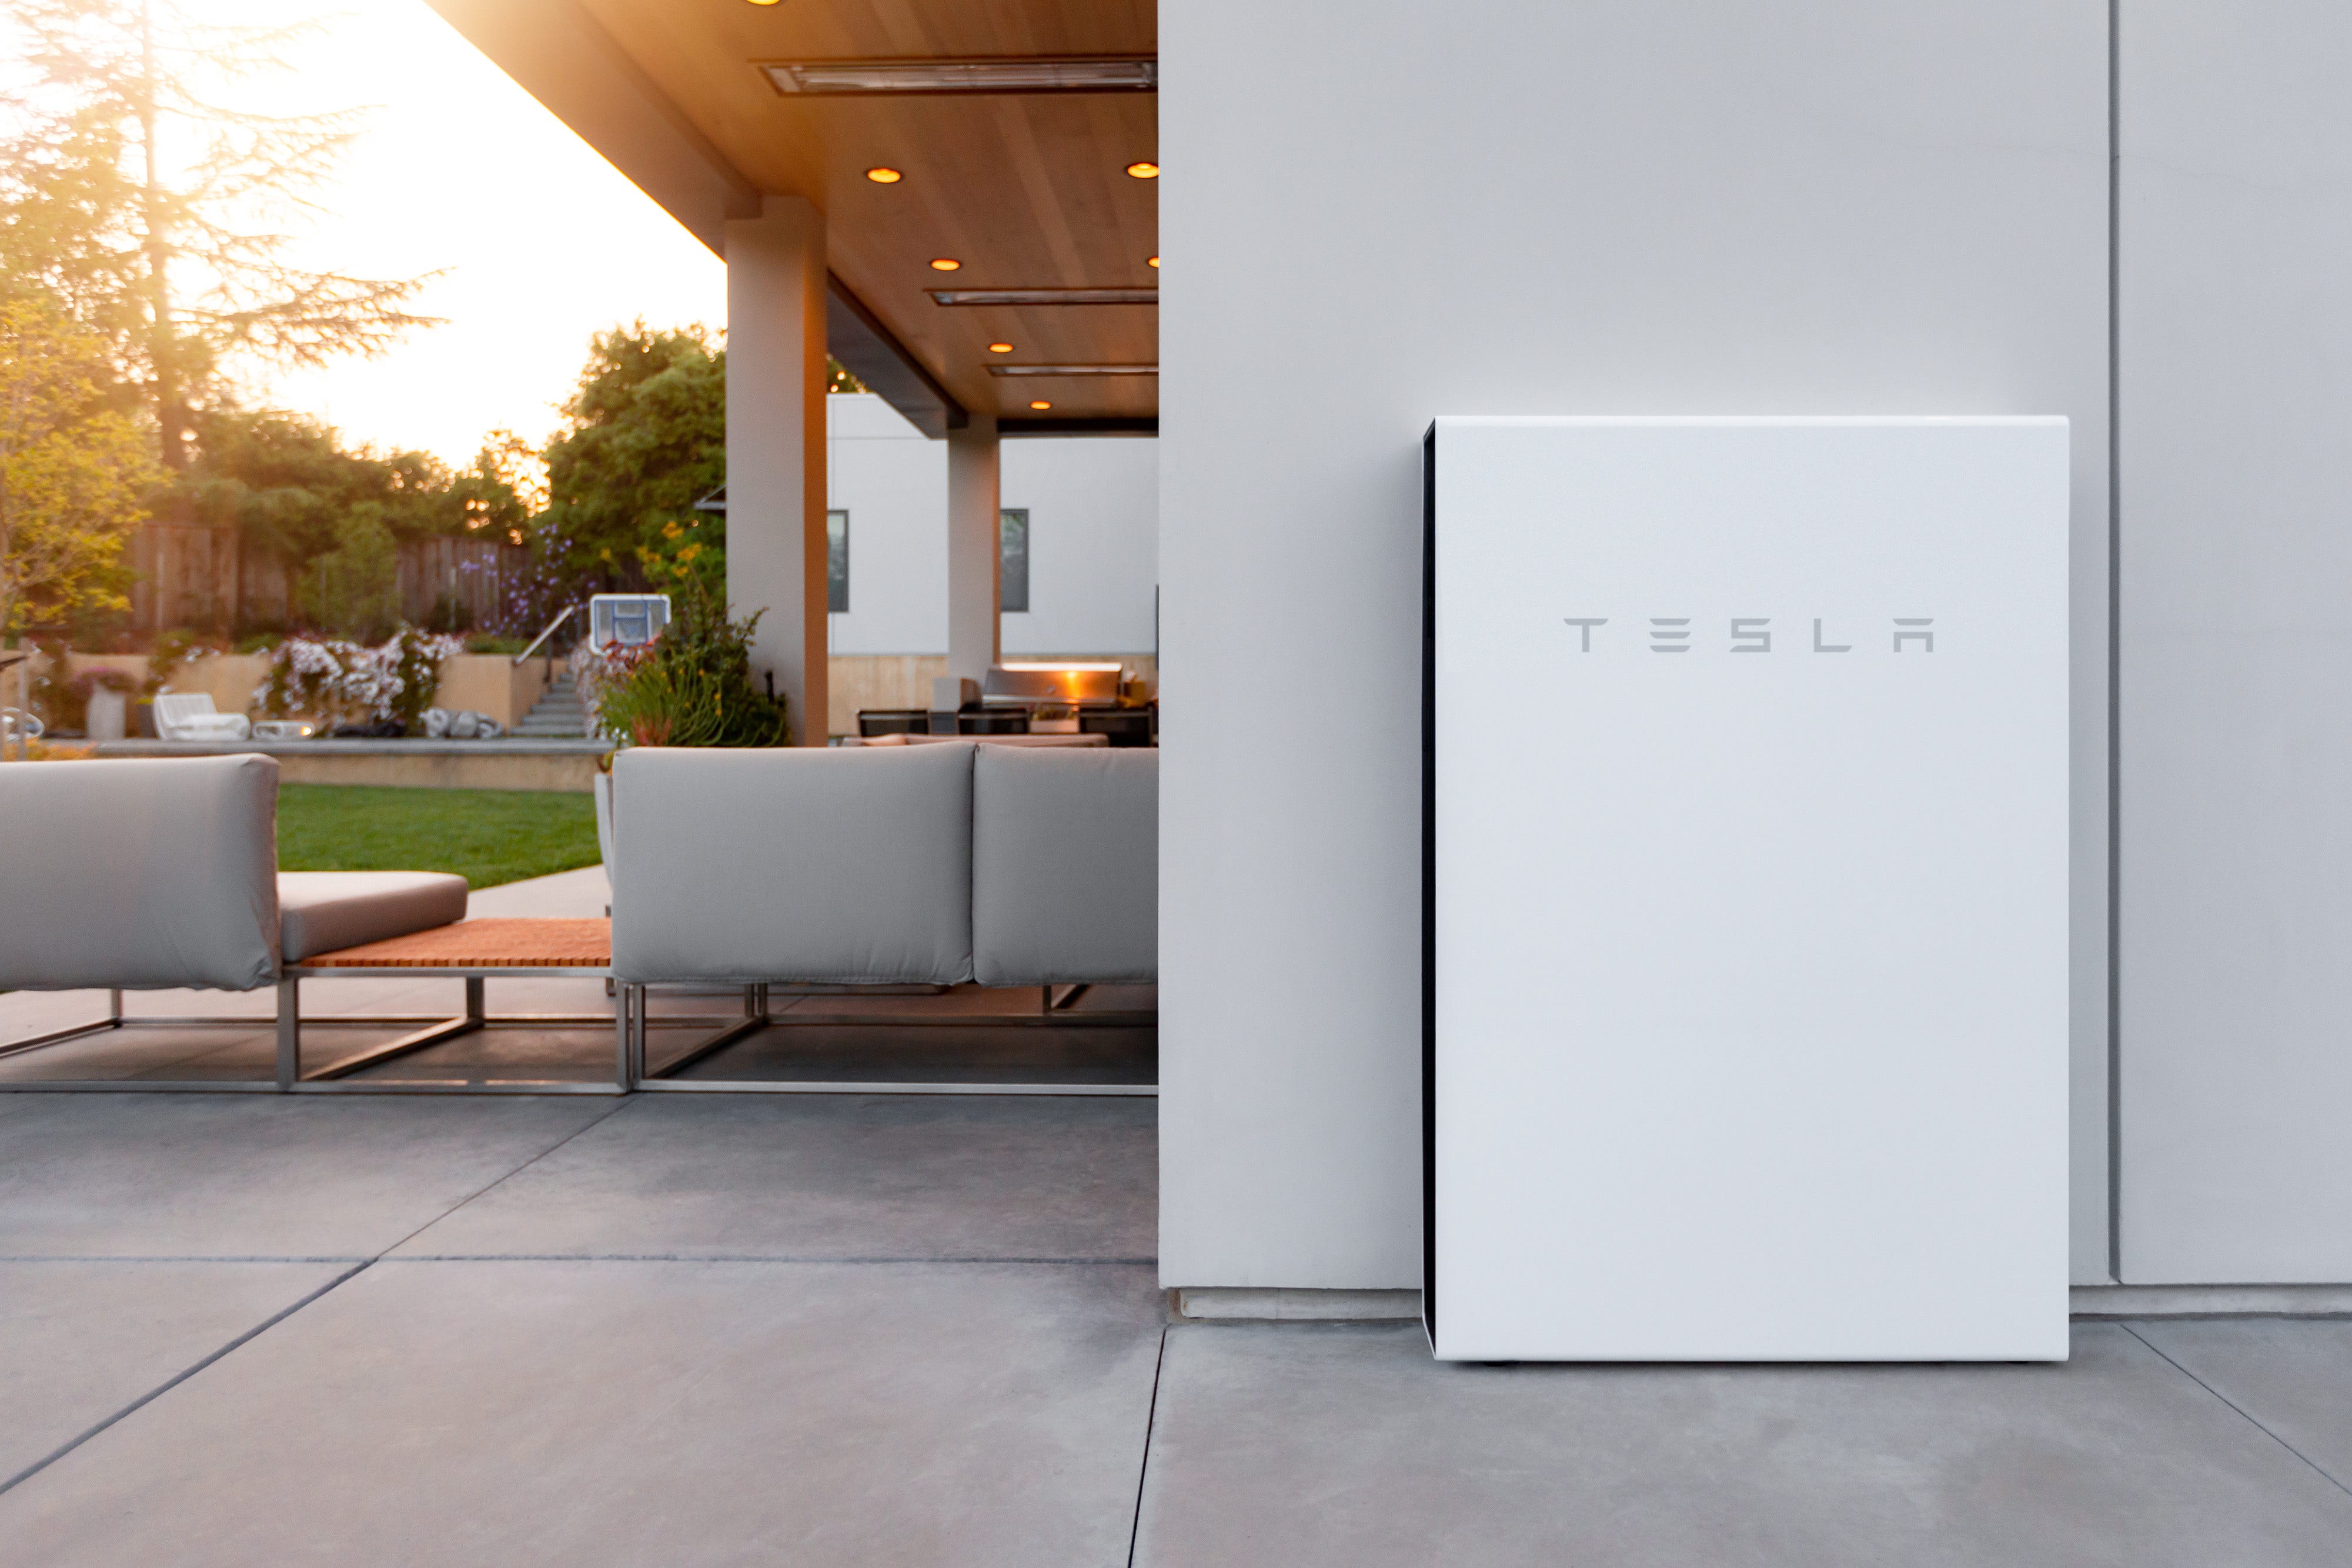 Tesla To Only Sell Solar Panels And Roofs Bundled With Powerwall From Next Week